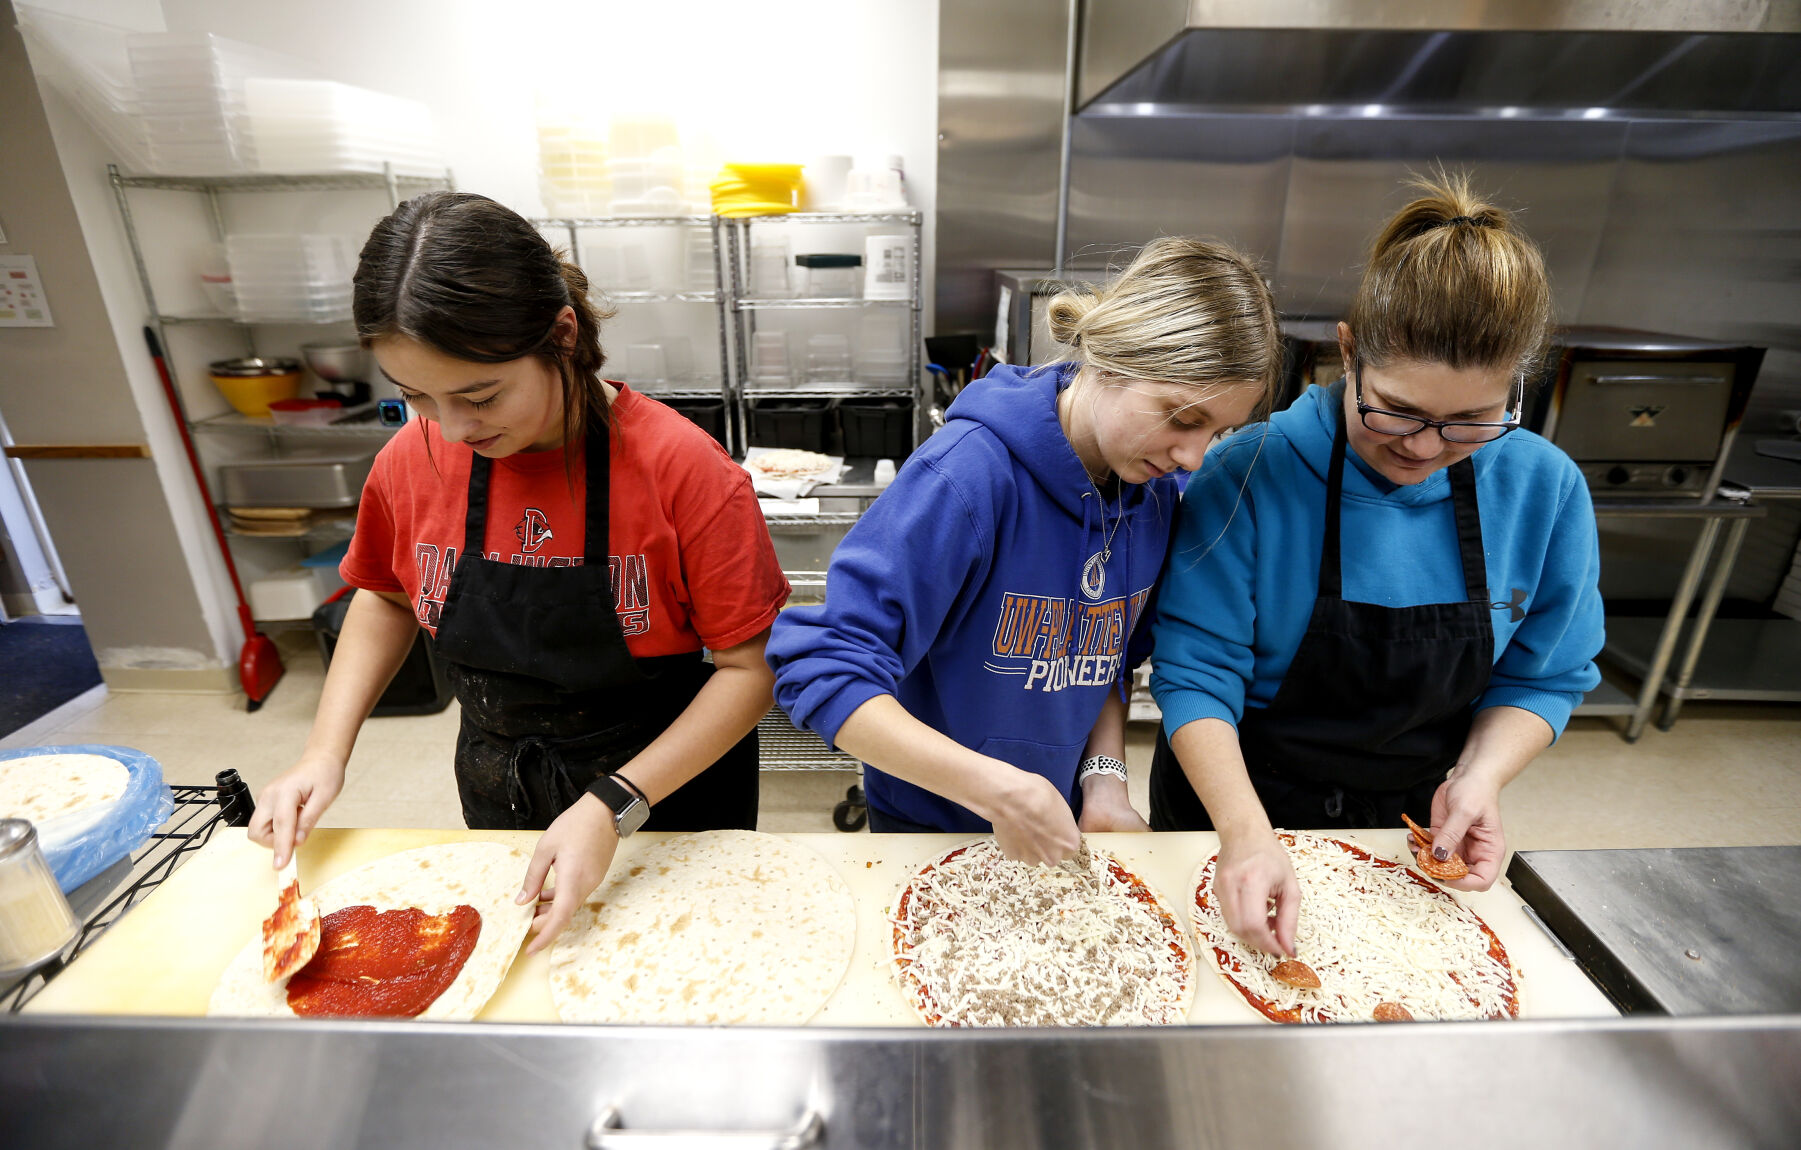 Alexis Mosley (left), 16, works with Ava Smith and her mother, co-owner Val Smith on making pizzas at Vinger’s Pizza in Darlington, Wis., before opening on Saturday, Nov. 26, 2022.    PHOTO CREDIT: Dave Kettering